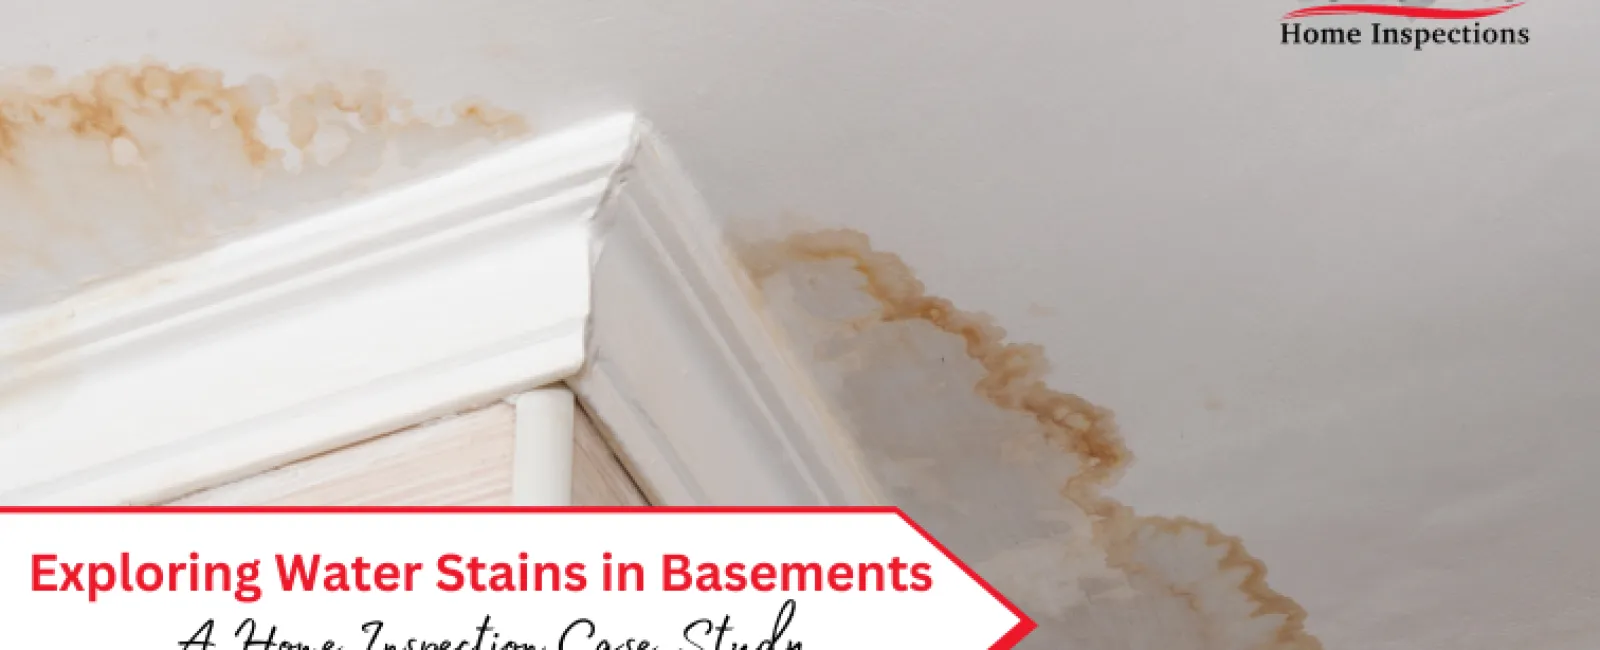 Exploring Water Stains in Basements: A Home Inspection Case Study